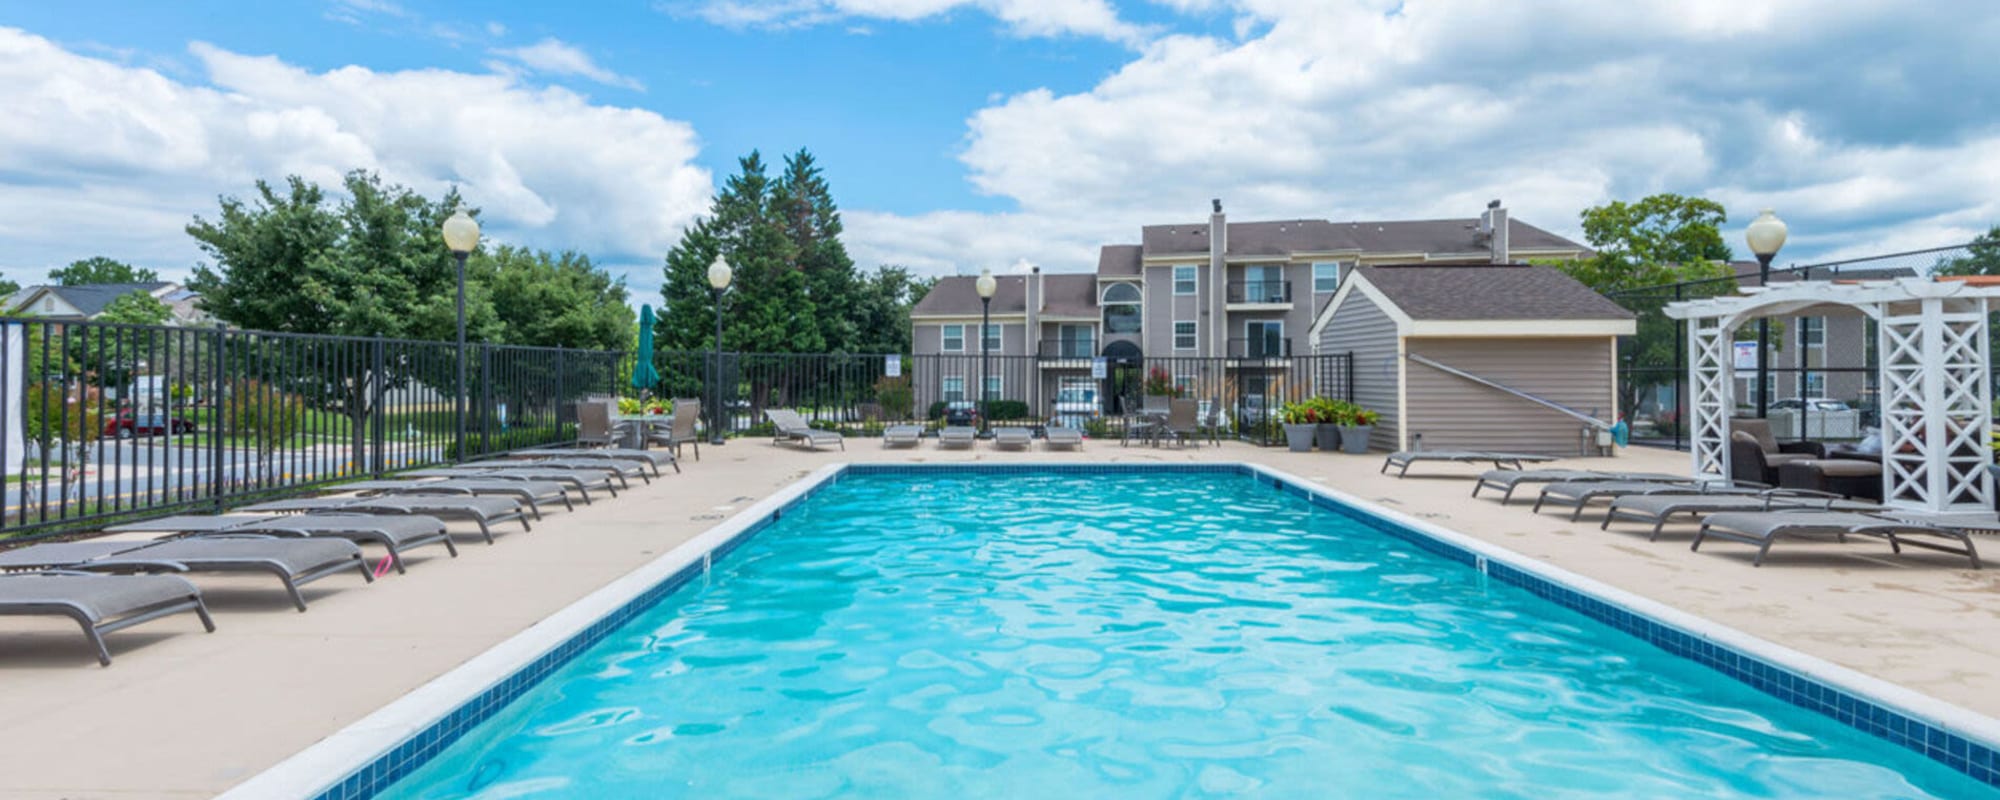 Apartments at Southfield in Nottingham, Maryland